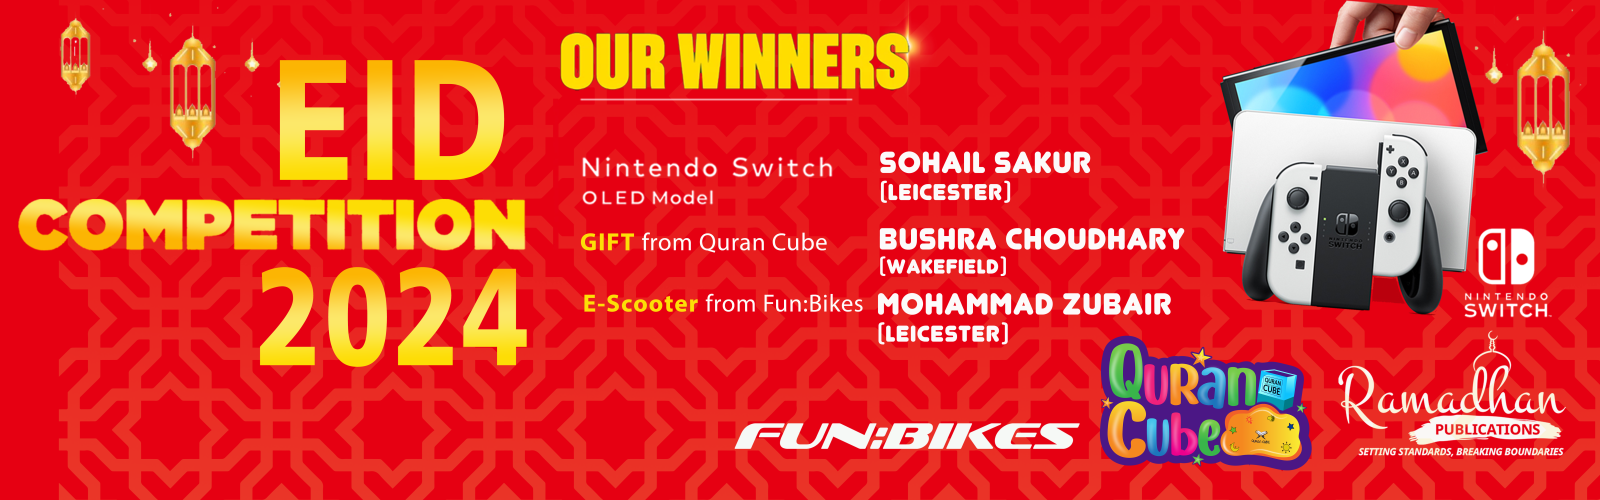 8.Eid Competition 2024 winners